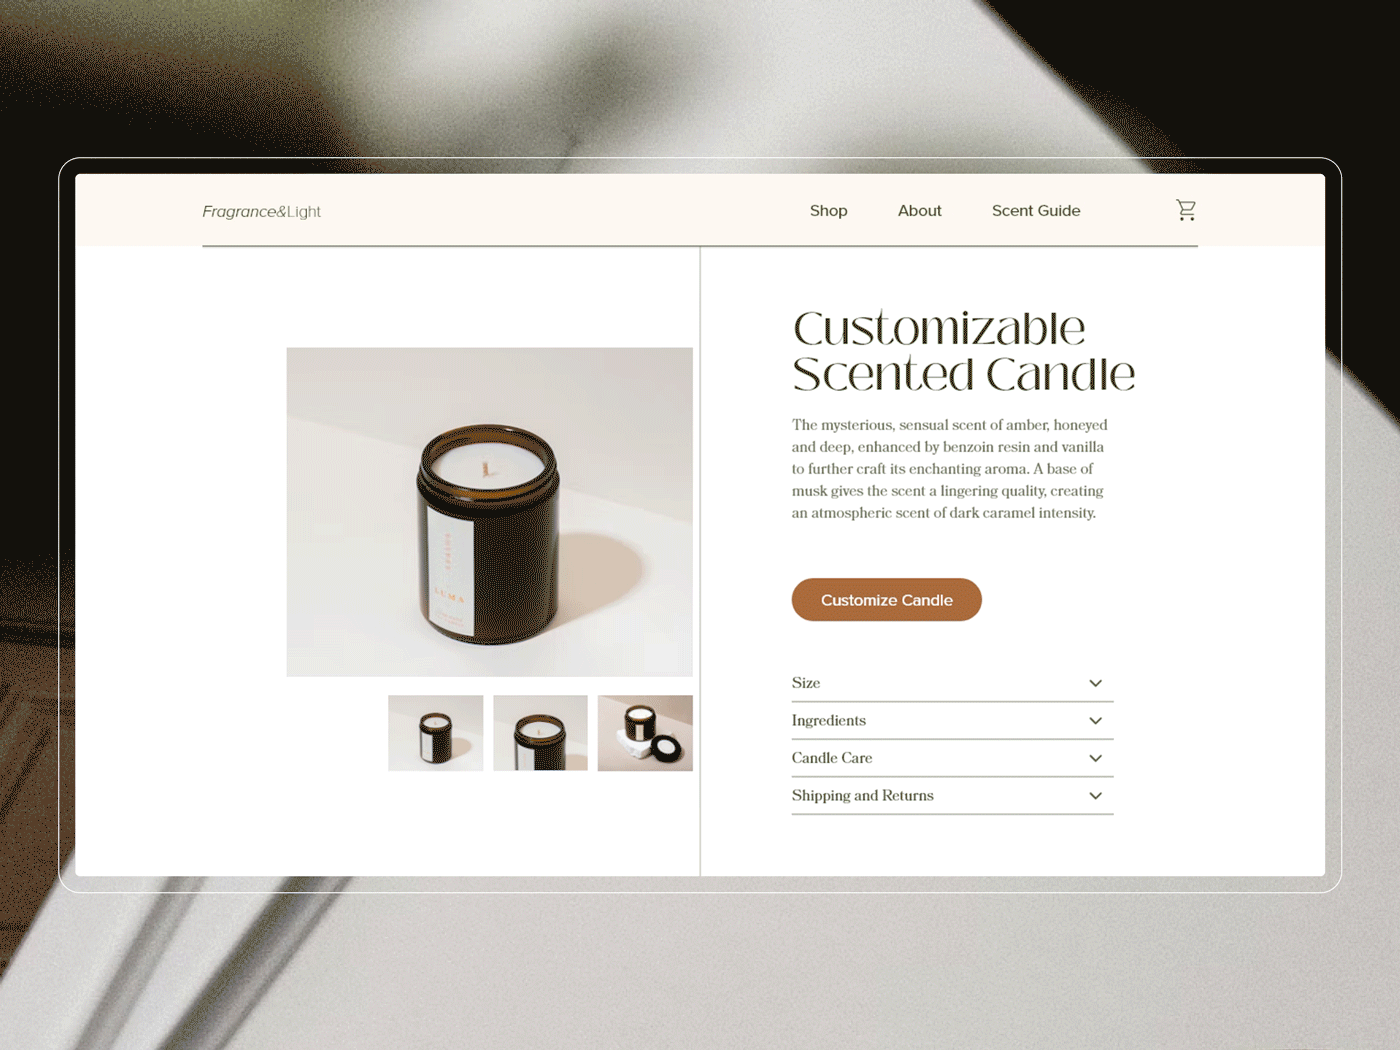 Product Details Page For a Candles Selling Online Store candles ecommerce online shop product design product details page ui uiux ux web website design